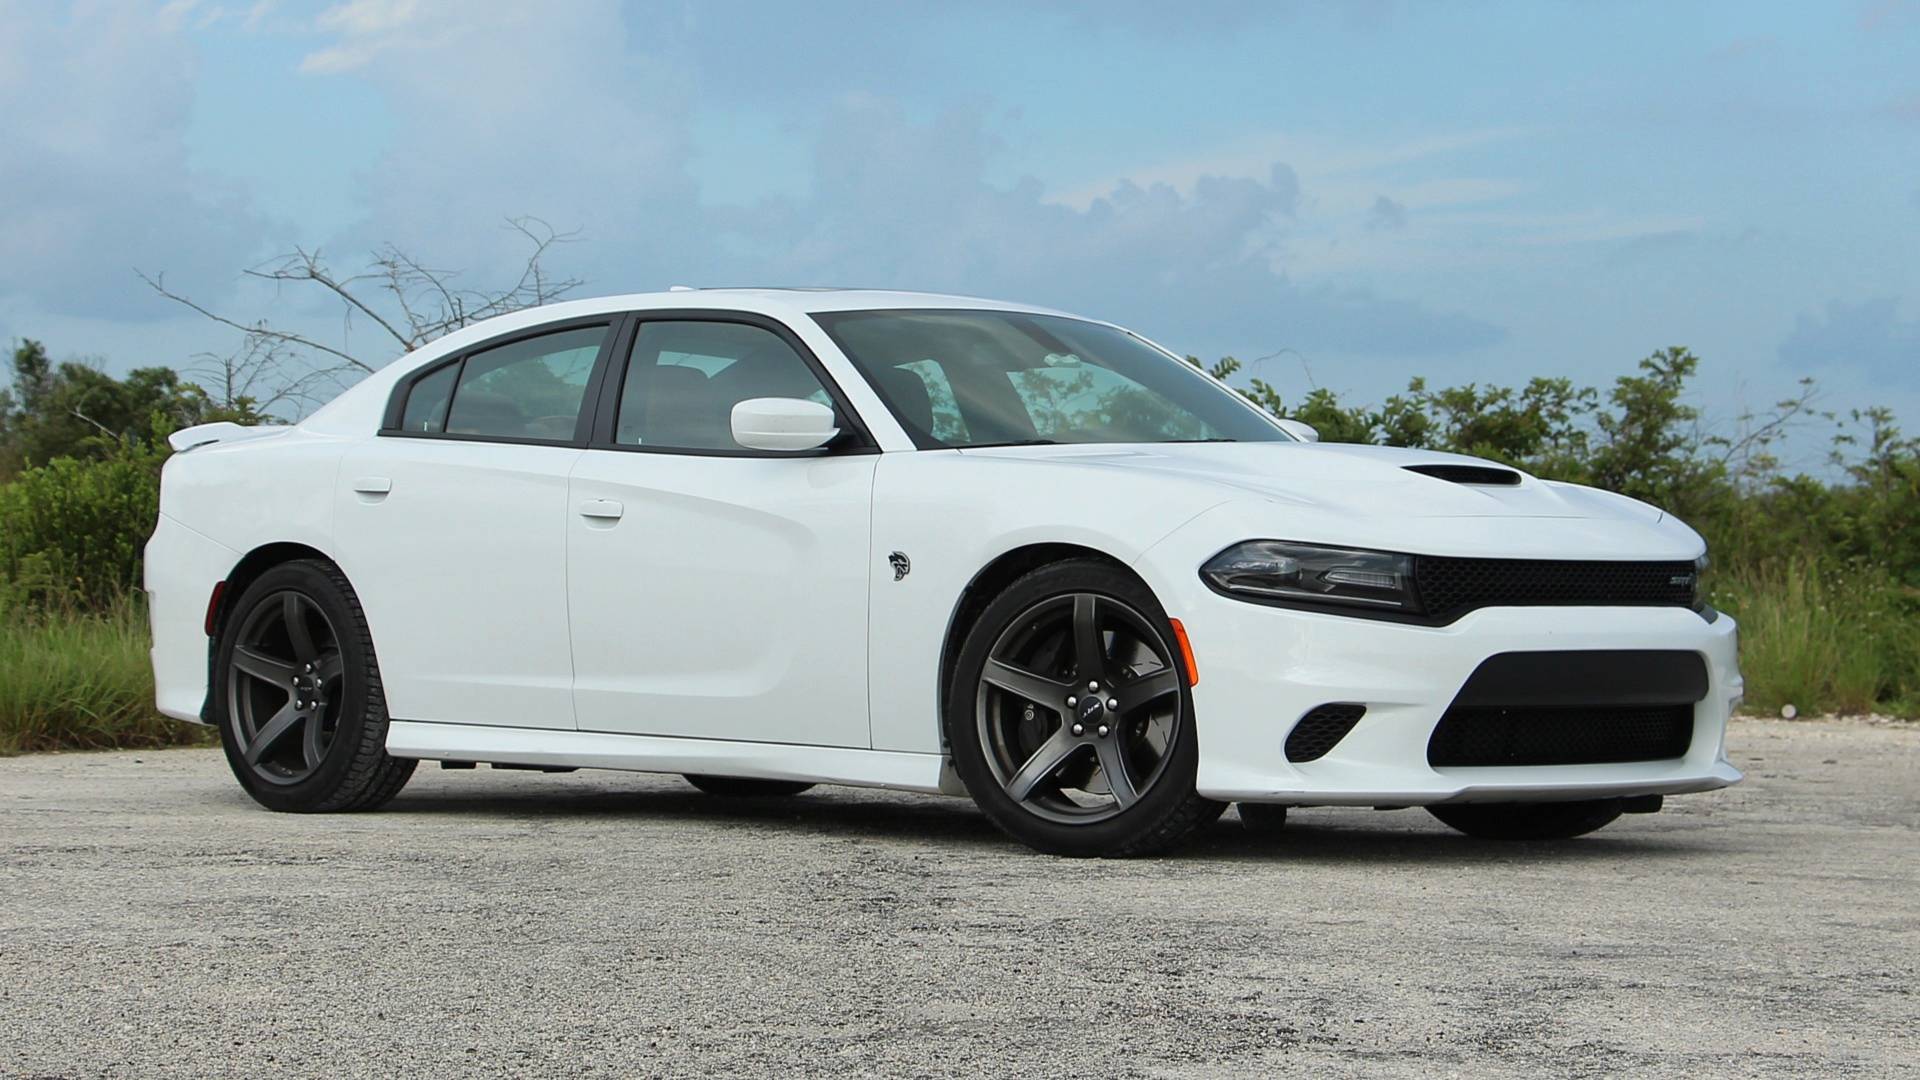 2018 Dodge Charger Hellcat Review: This Is America